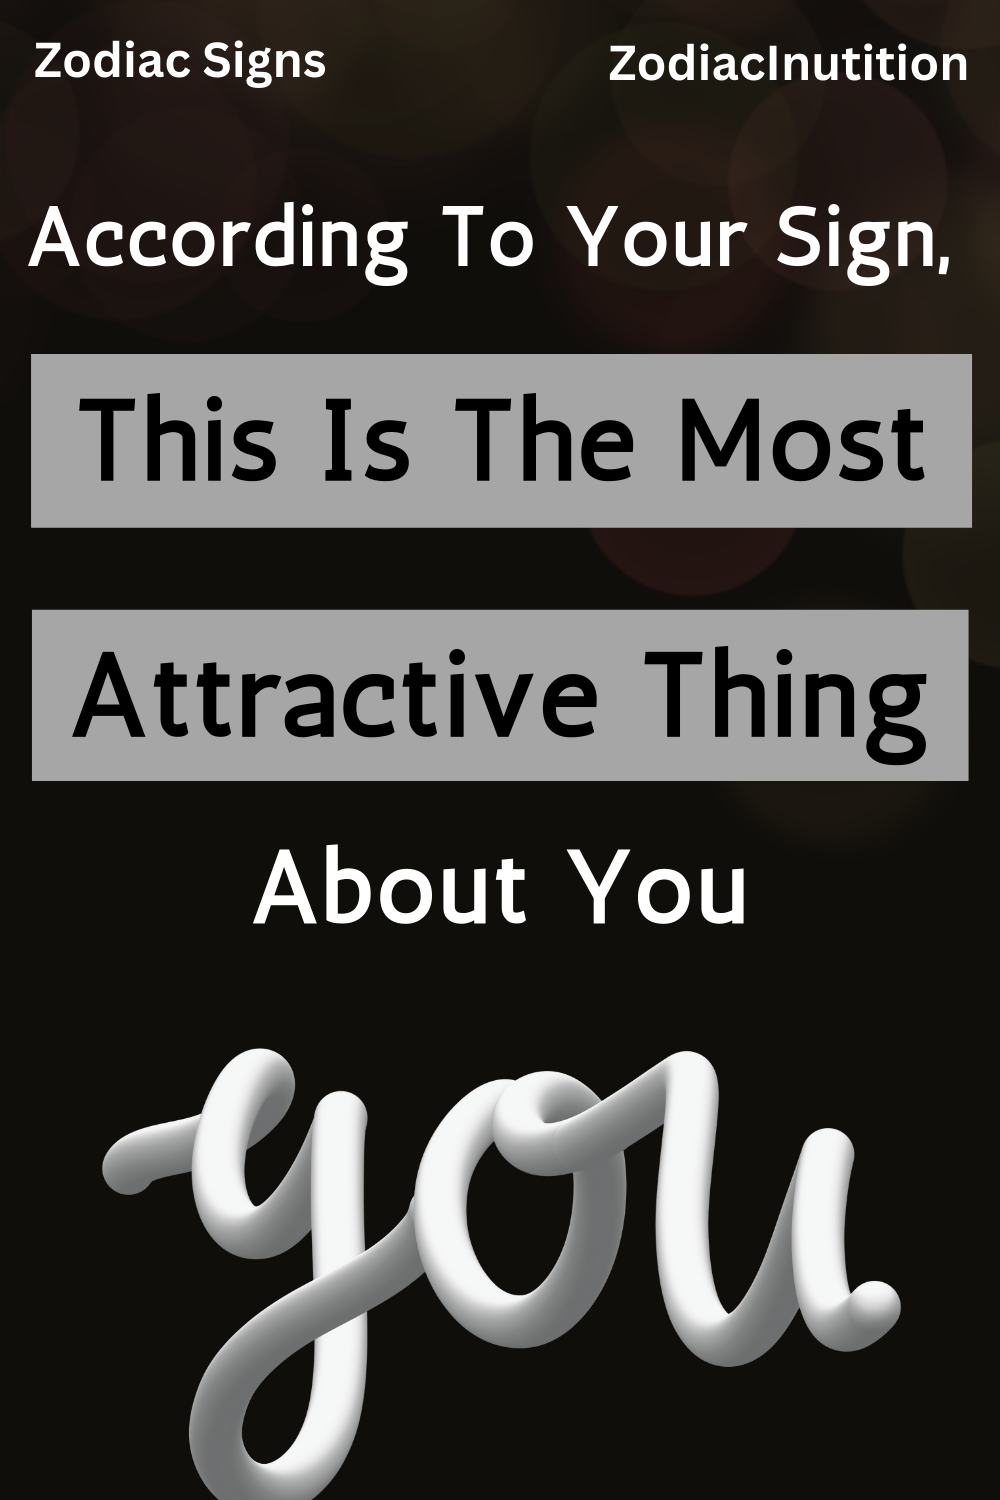 According To Your Sign, This Is The Most Attractive Thing About You